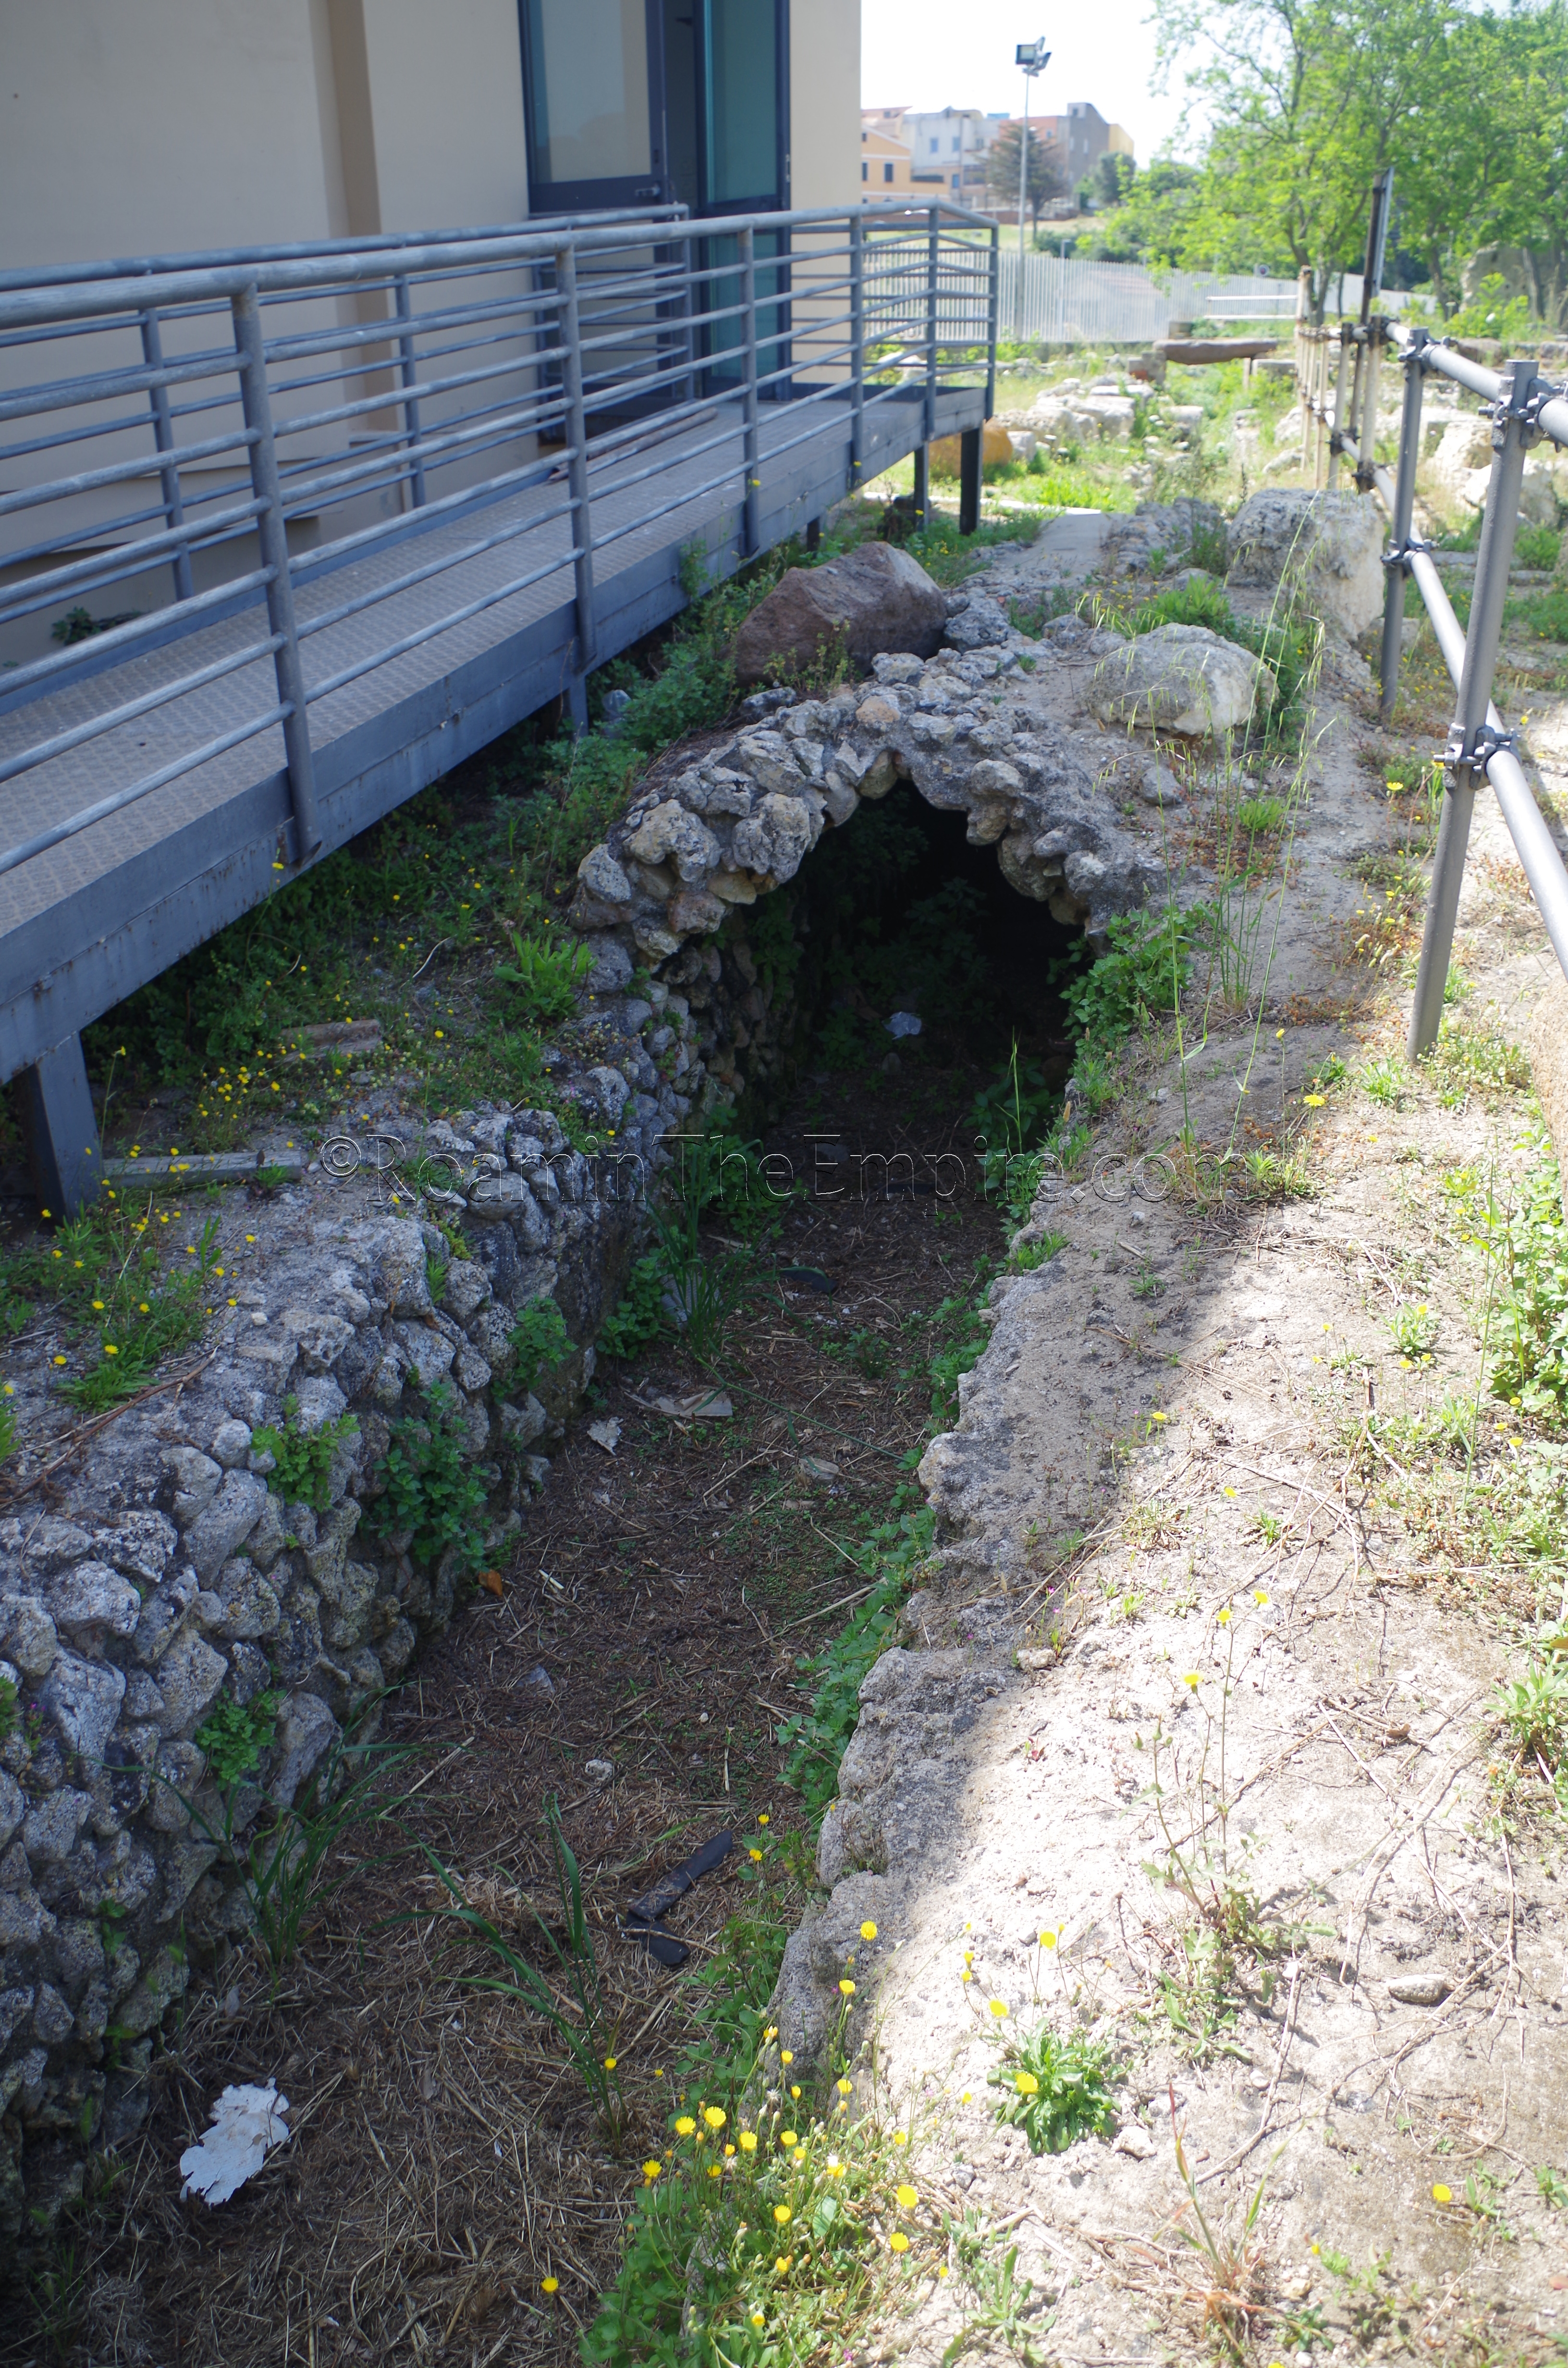 Sewer channel in the archaeological park.